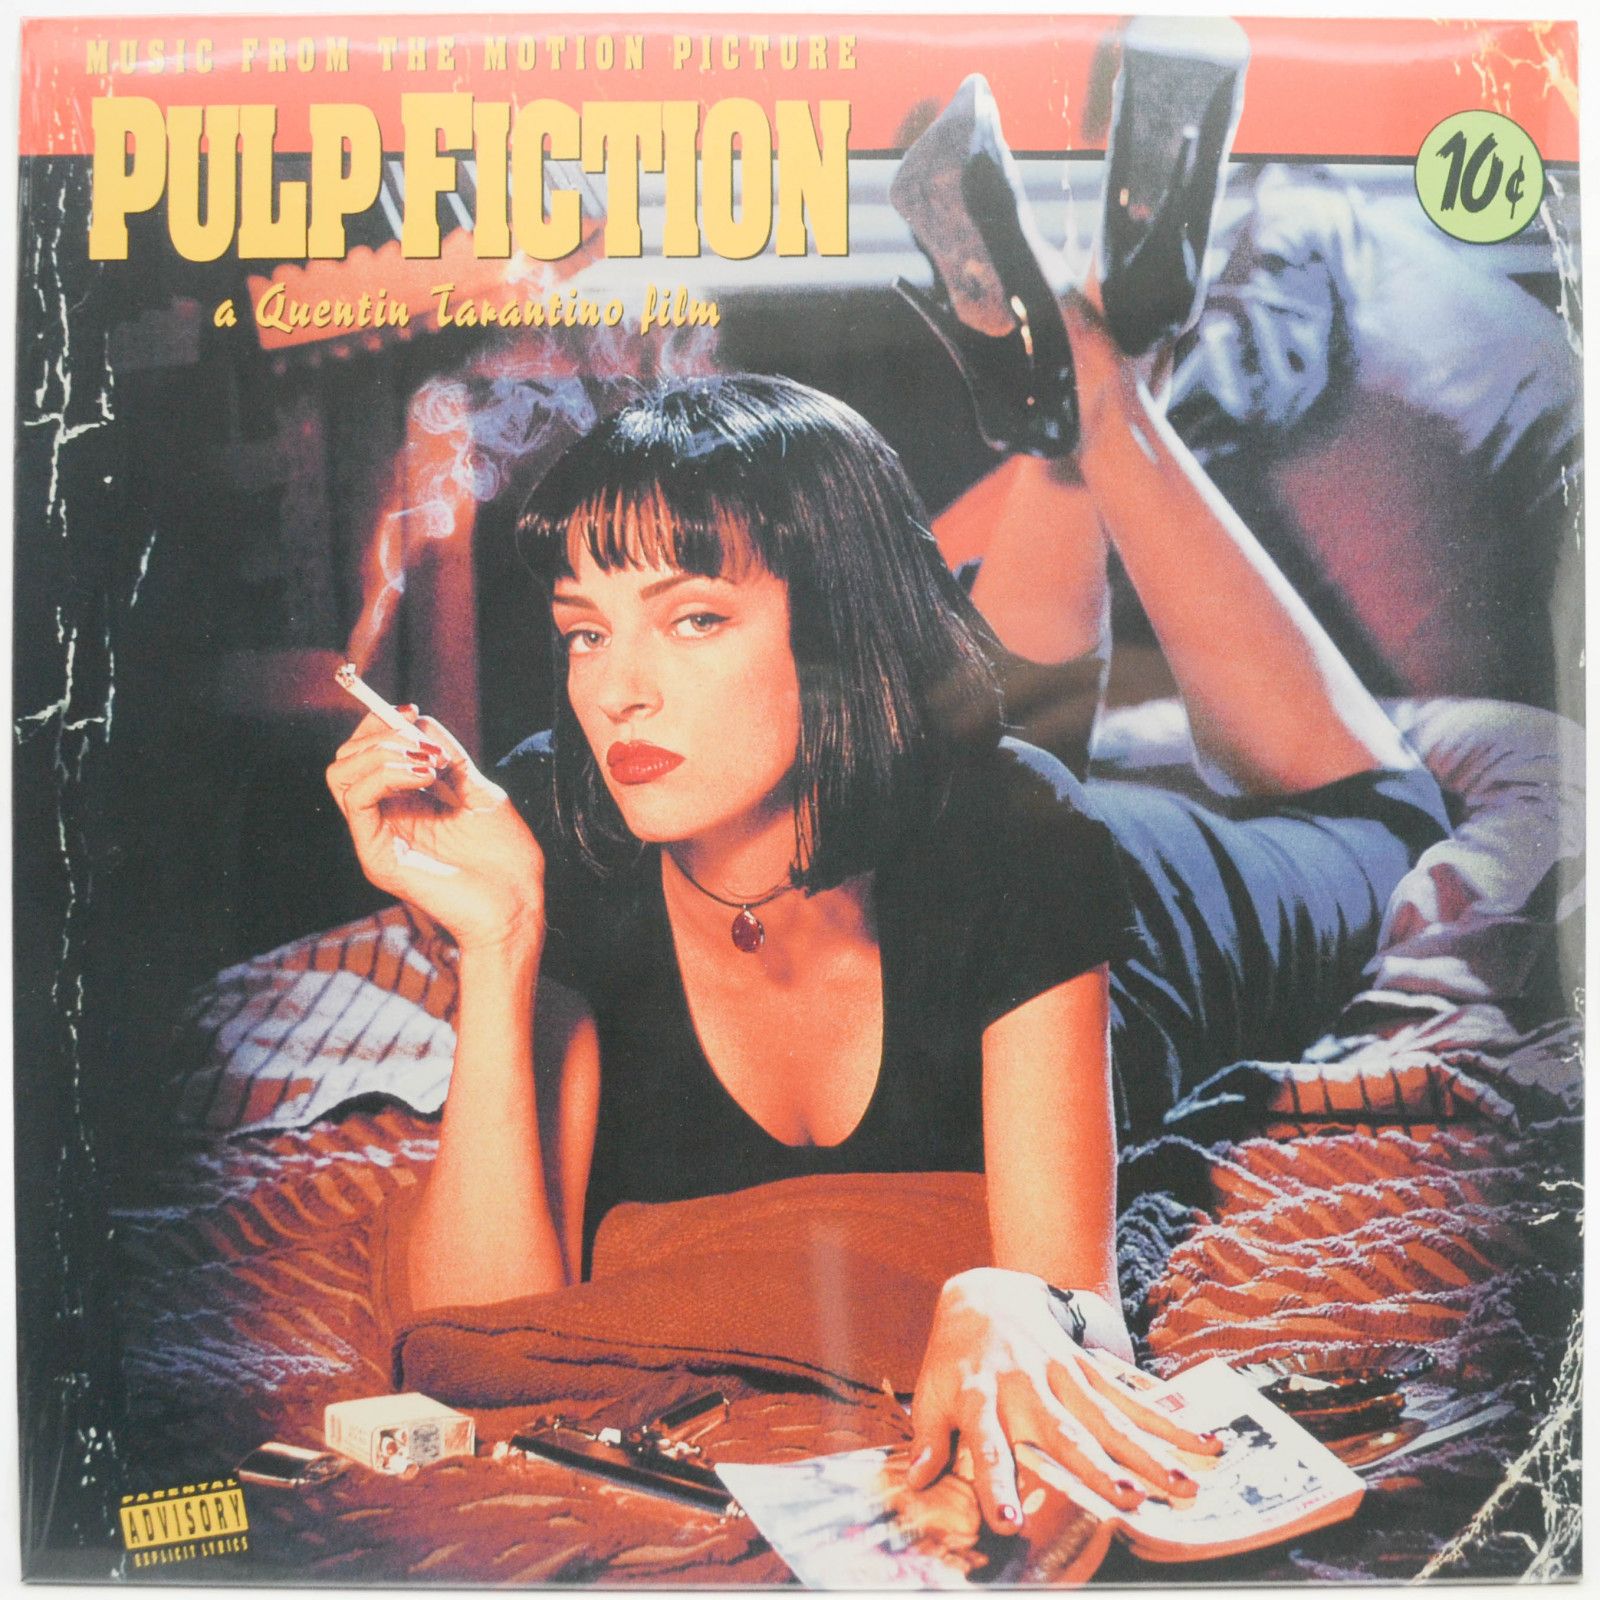 Various — Pulp Fiction (Music From The Motion Picture), 1994